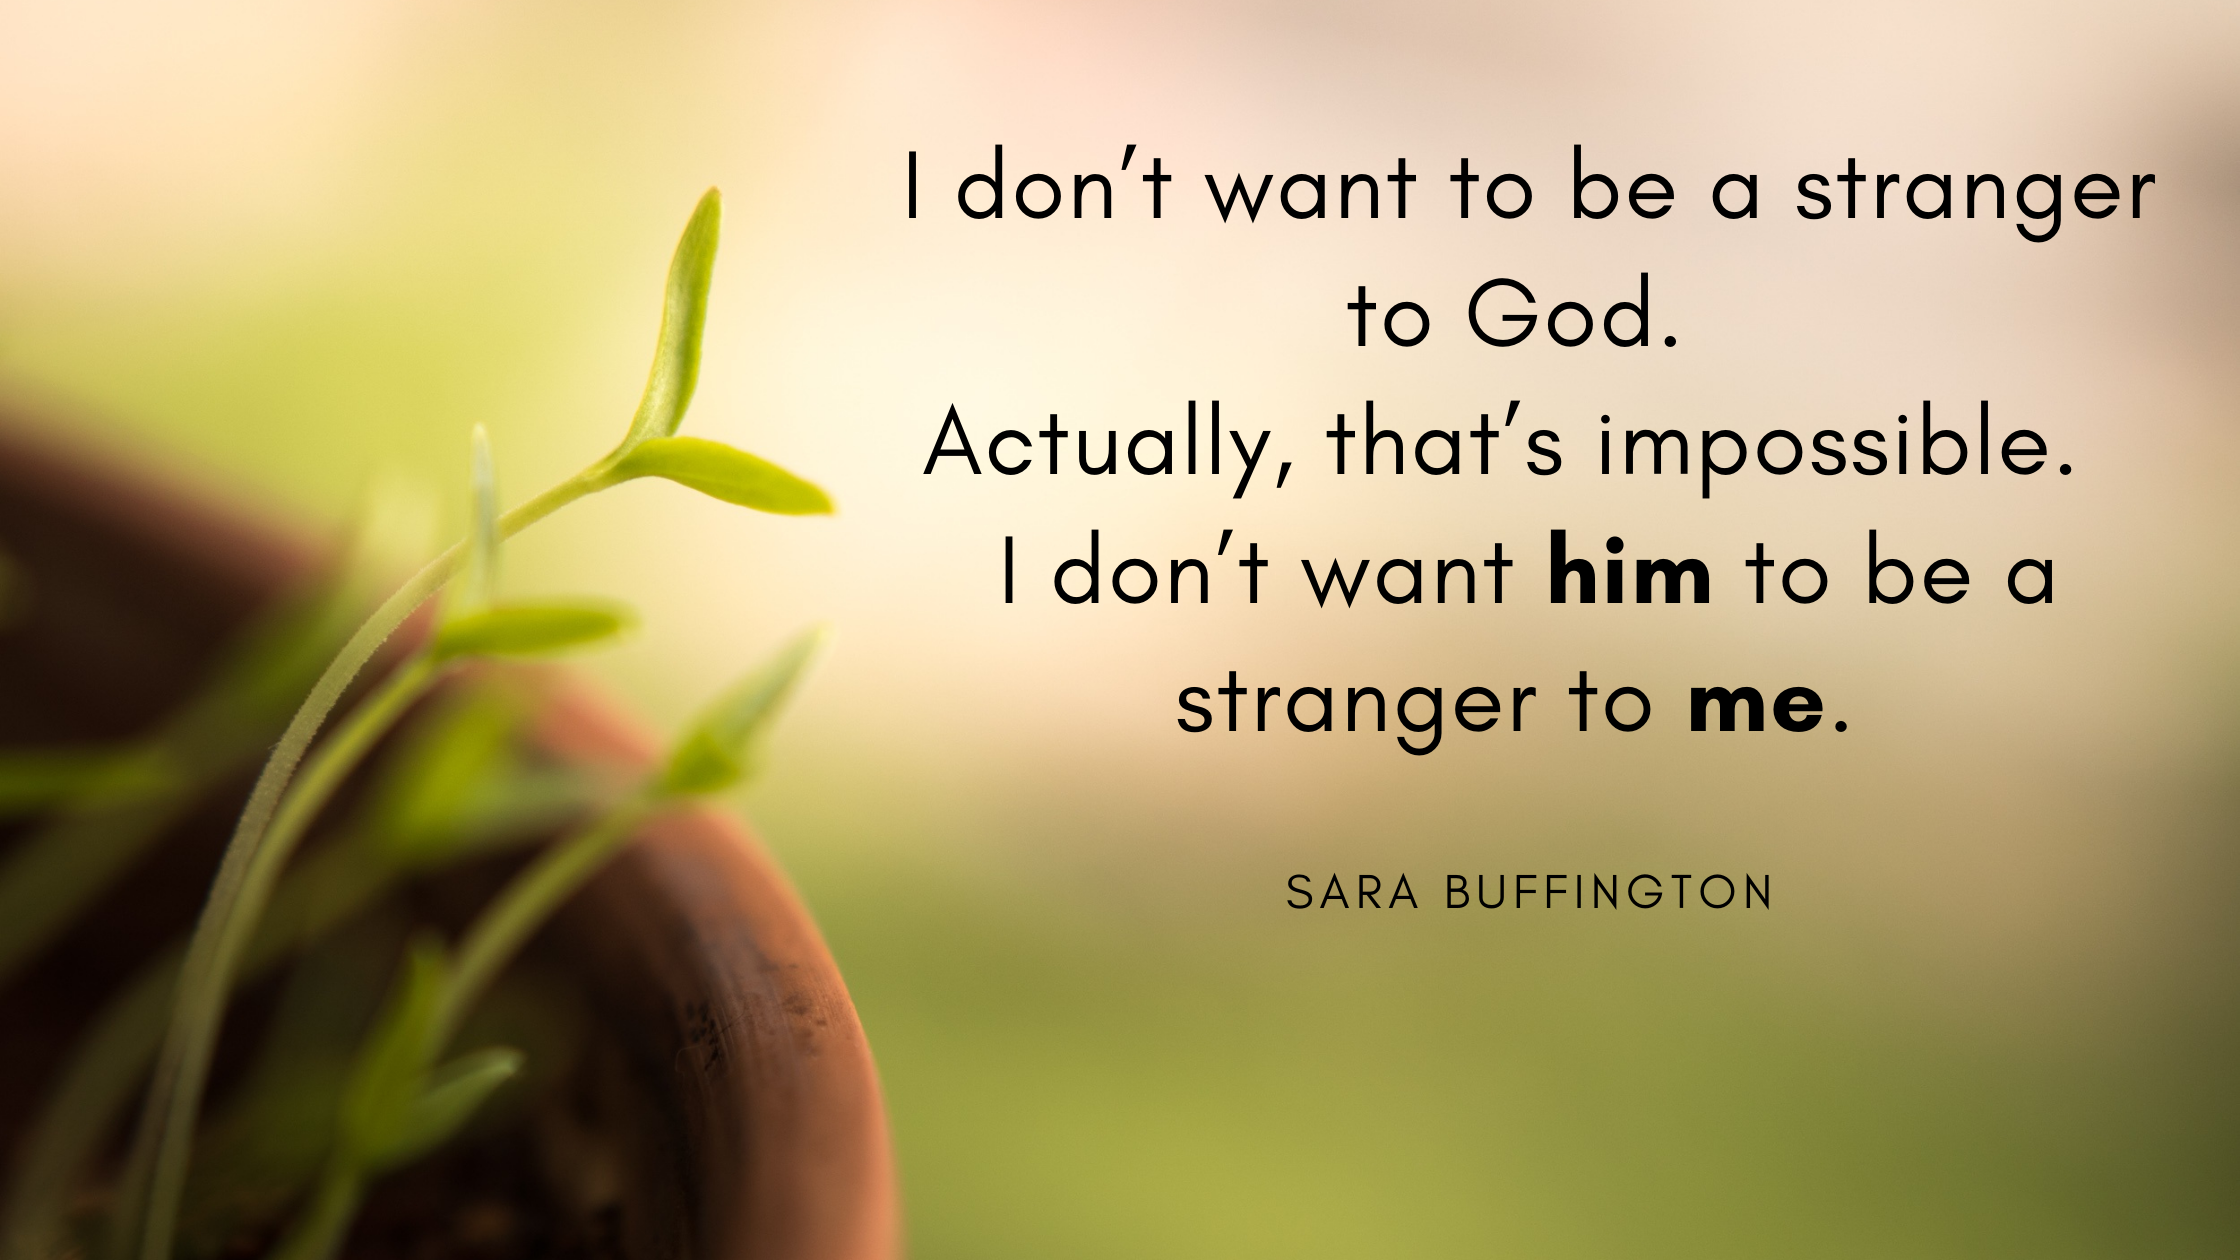 I don’t want to be a stranger to God. Actually, that’s impossible. I don’t want him to be a stranger to me.